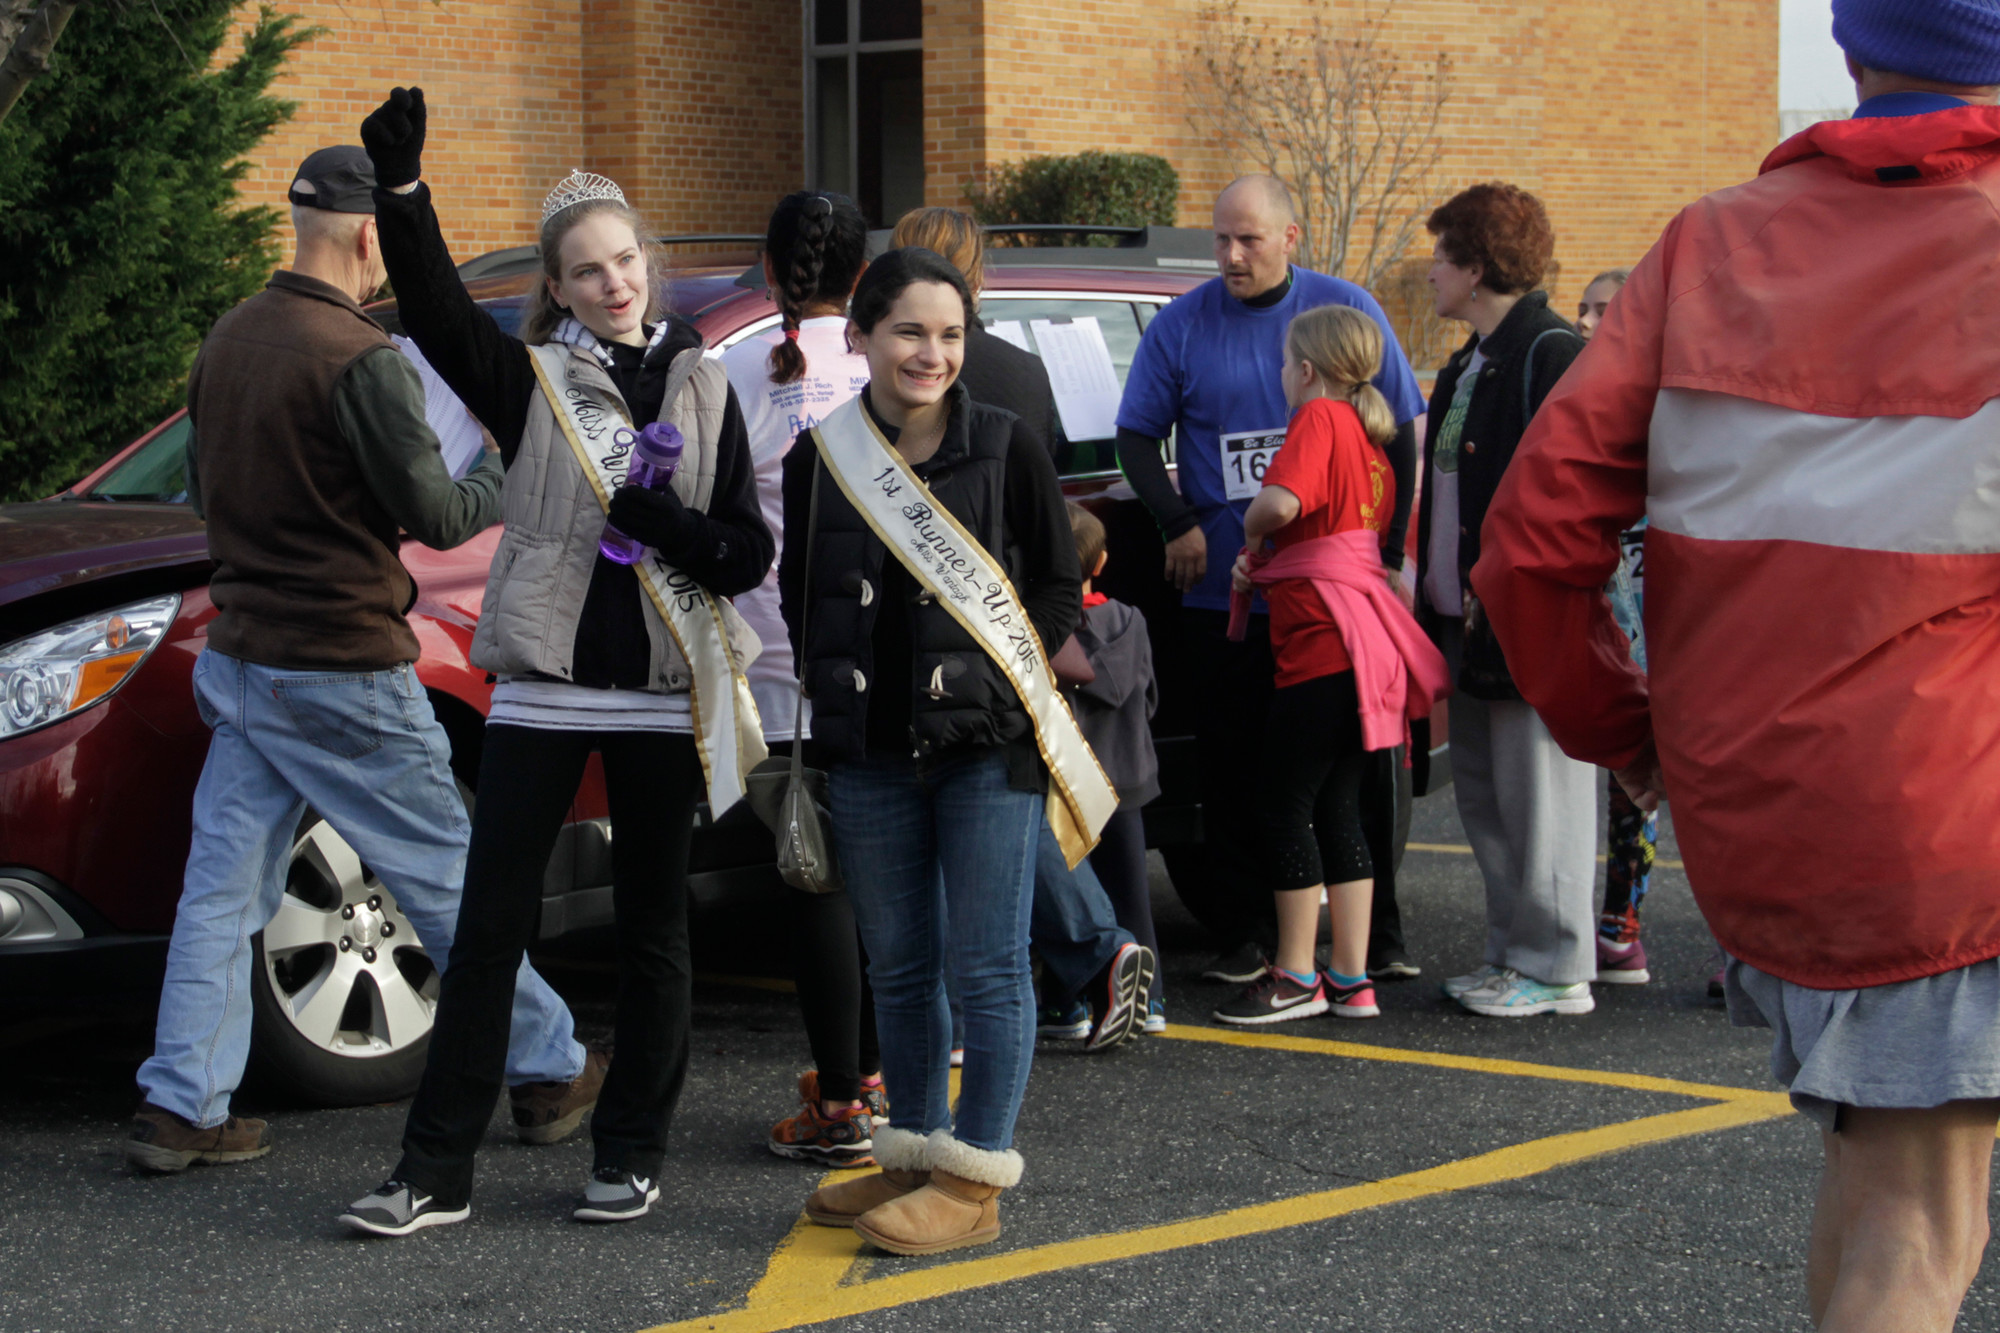 Miss Wantagh Keri Balnis, left, and first runner-up Ruth Kupperberg greeted the 213 runners as they finished the five-mile race at the middle school.